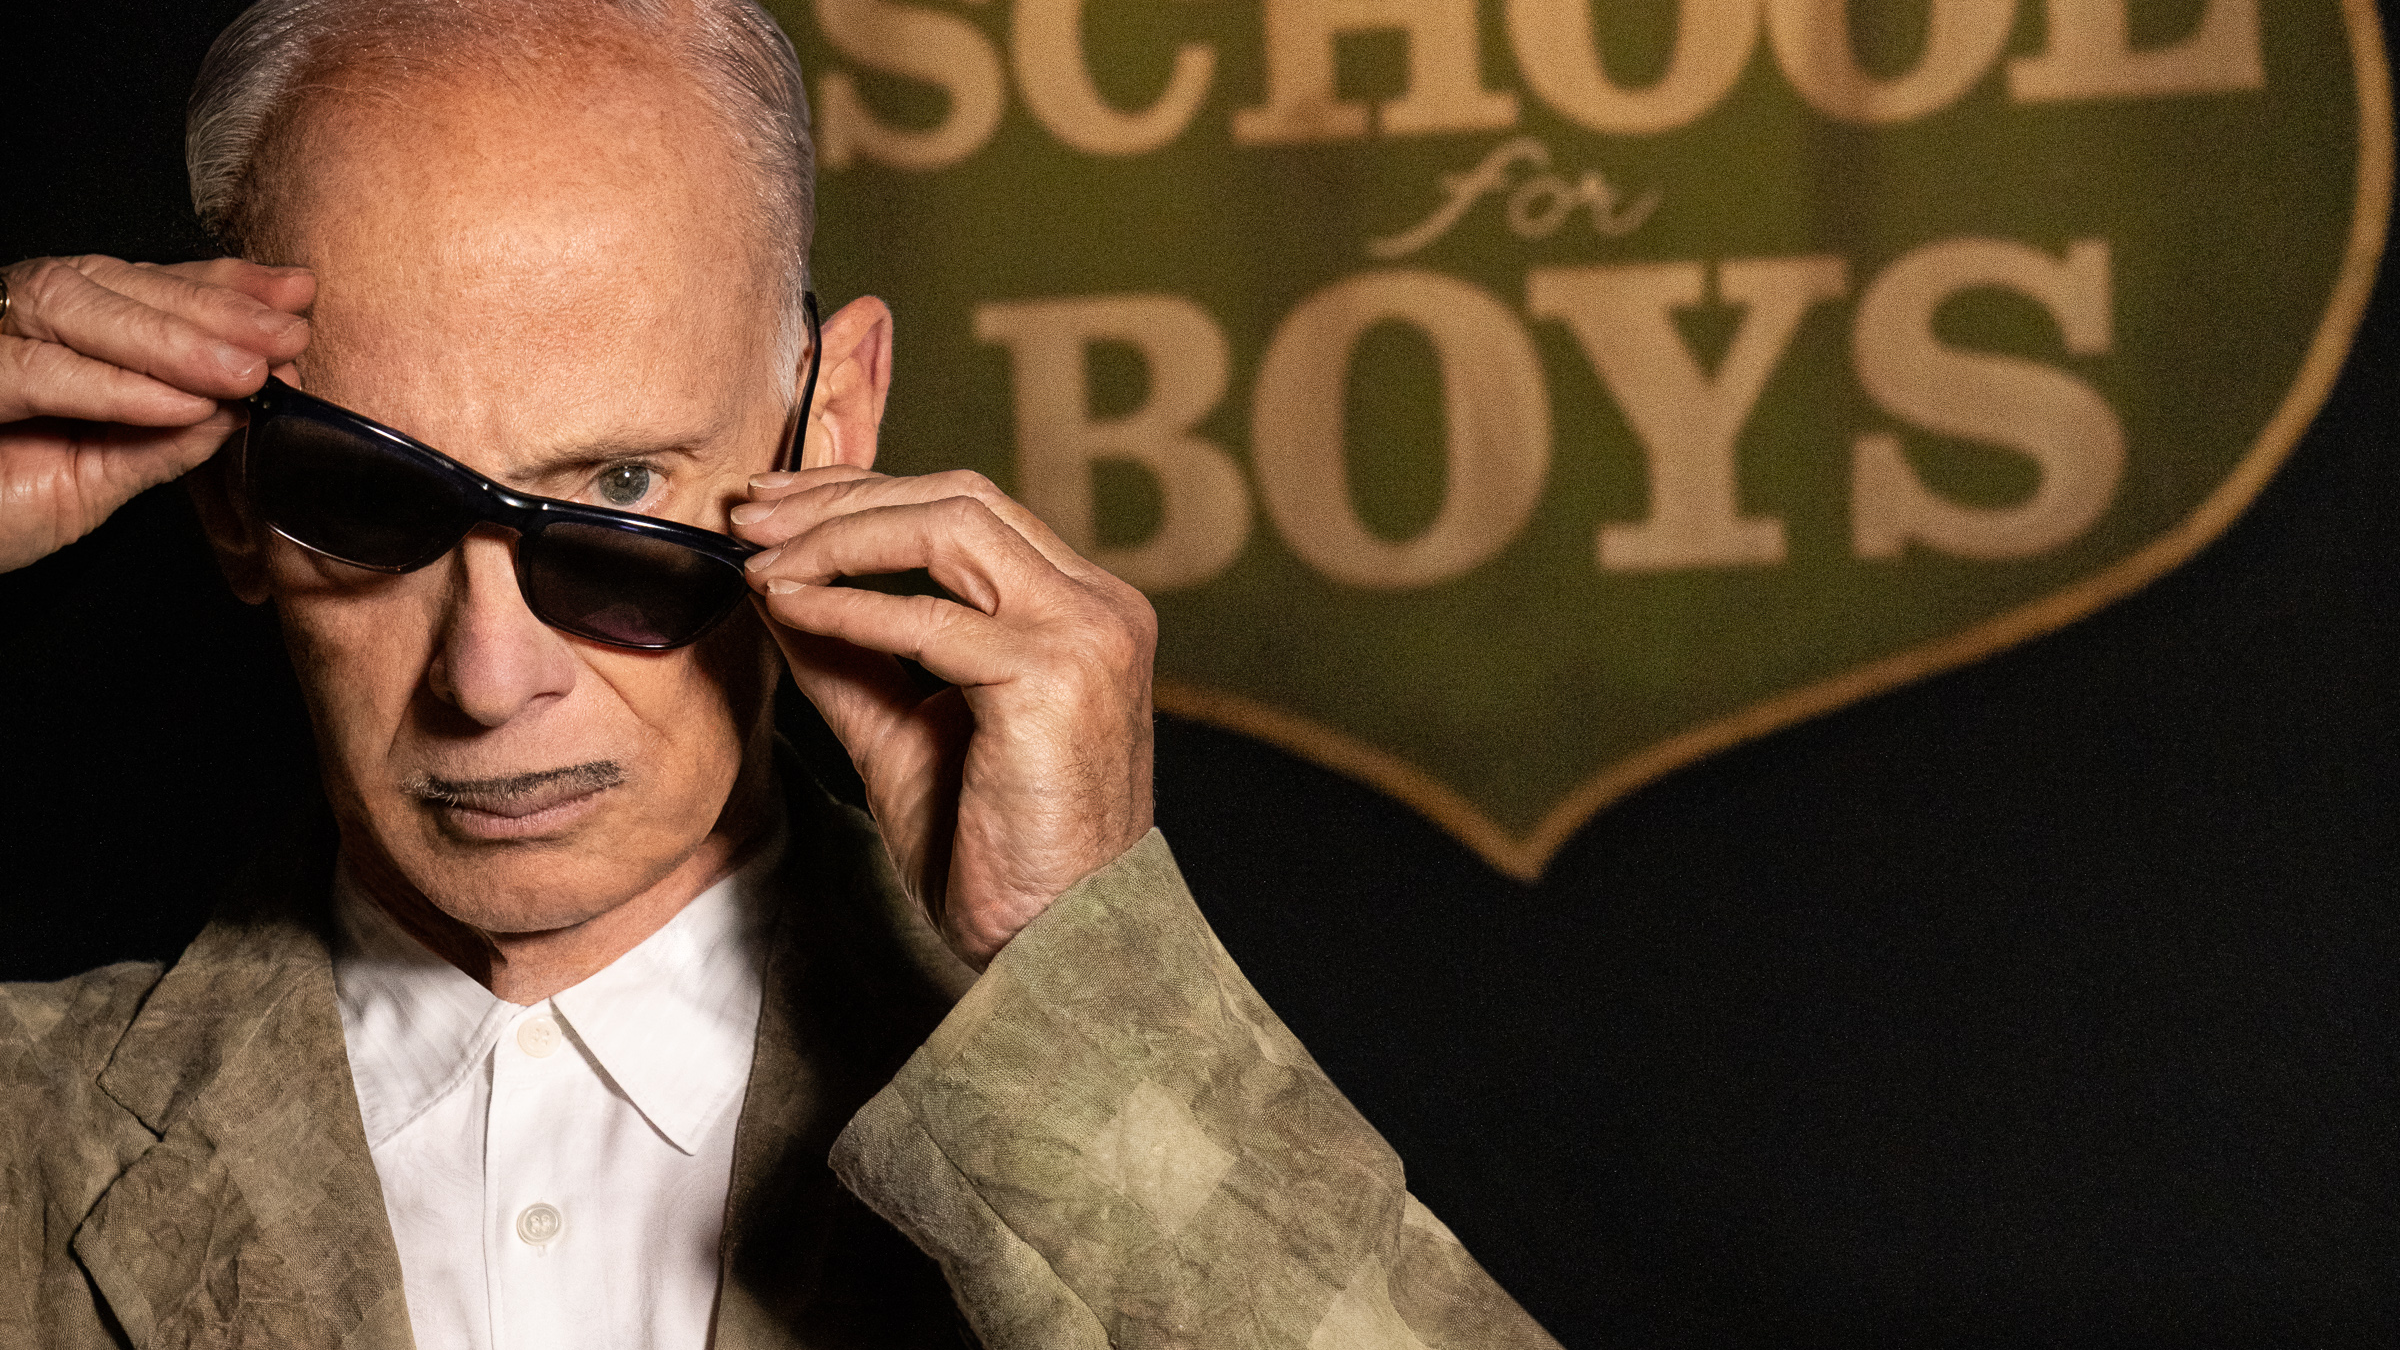 Bad Taste Won in Way\': An John Waters With Joyous Conversation a Unfiltered (Exclusive)